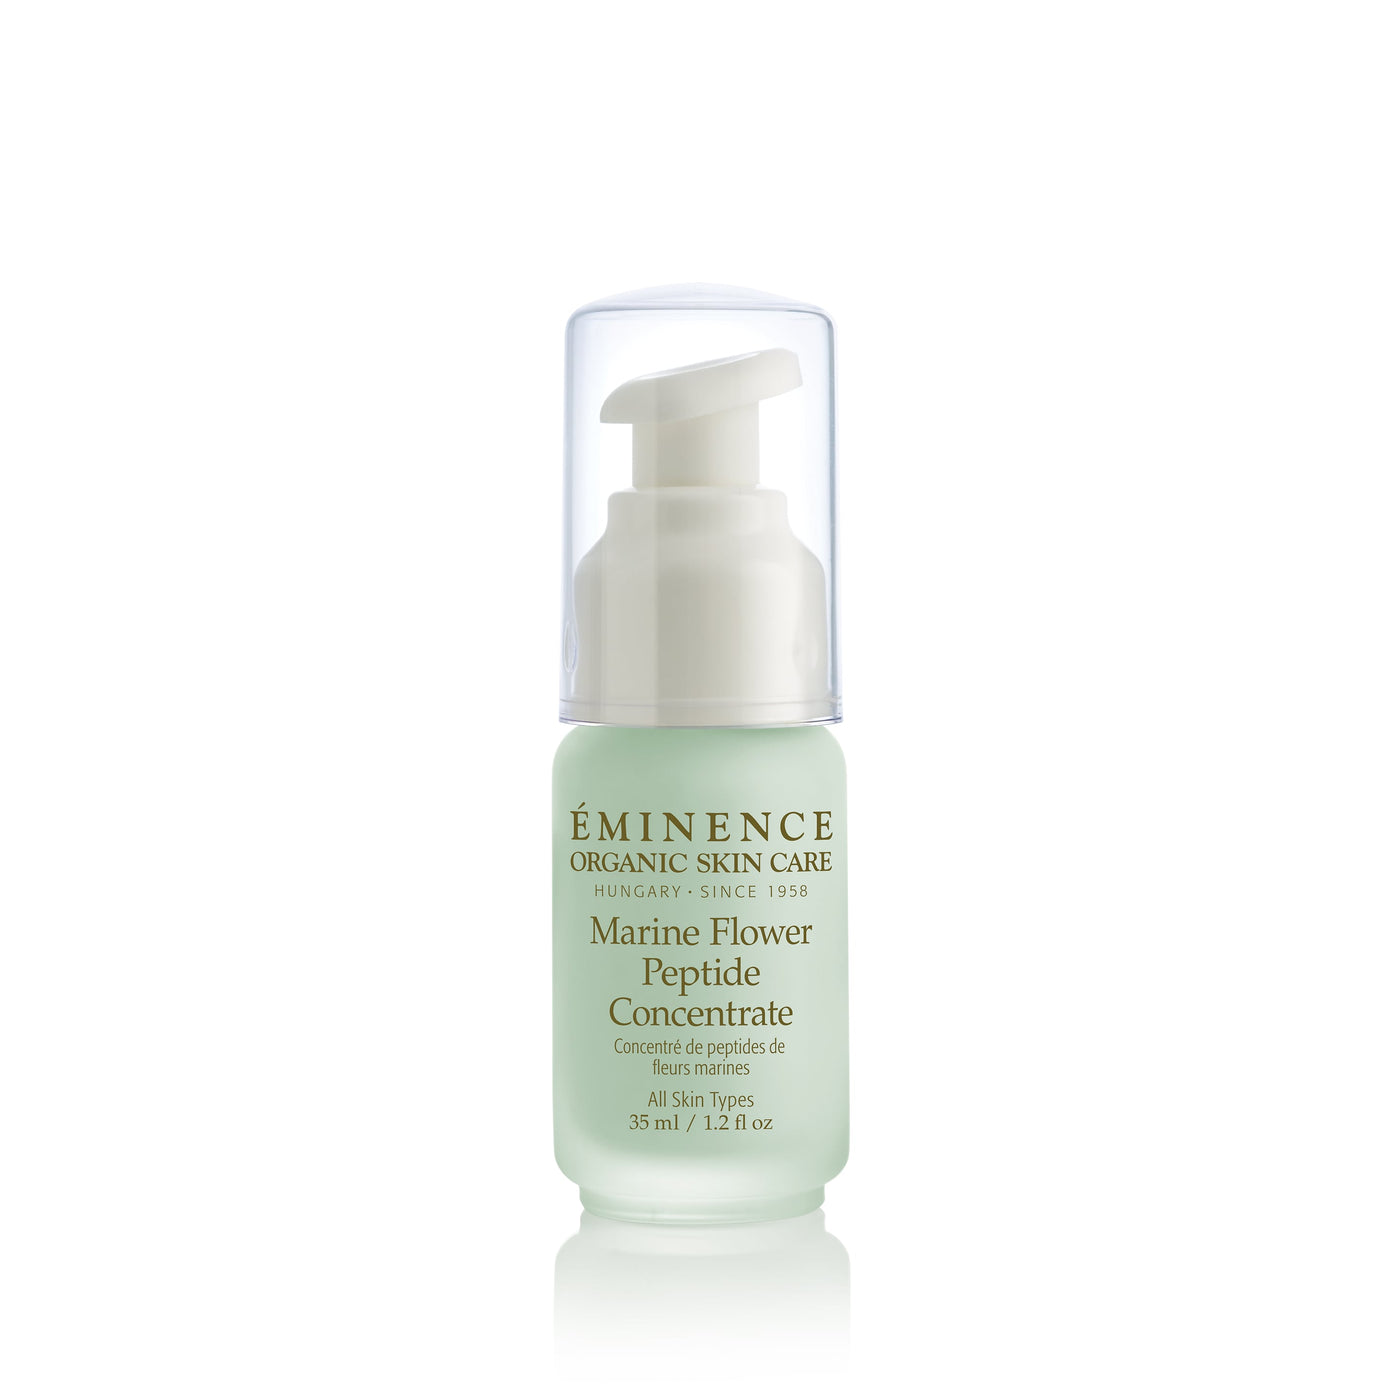 Eminence Organics Marine Flower Peptide Concentrate - Radiance Clean Beauty